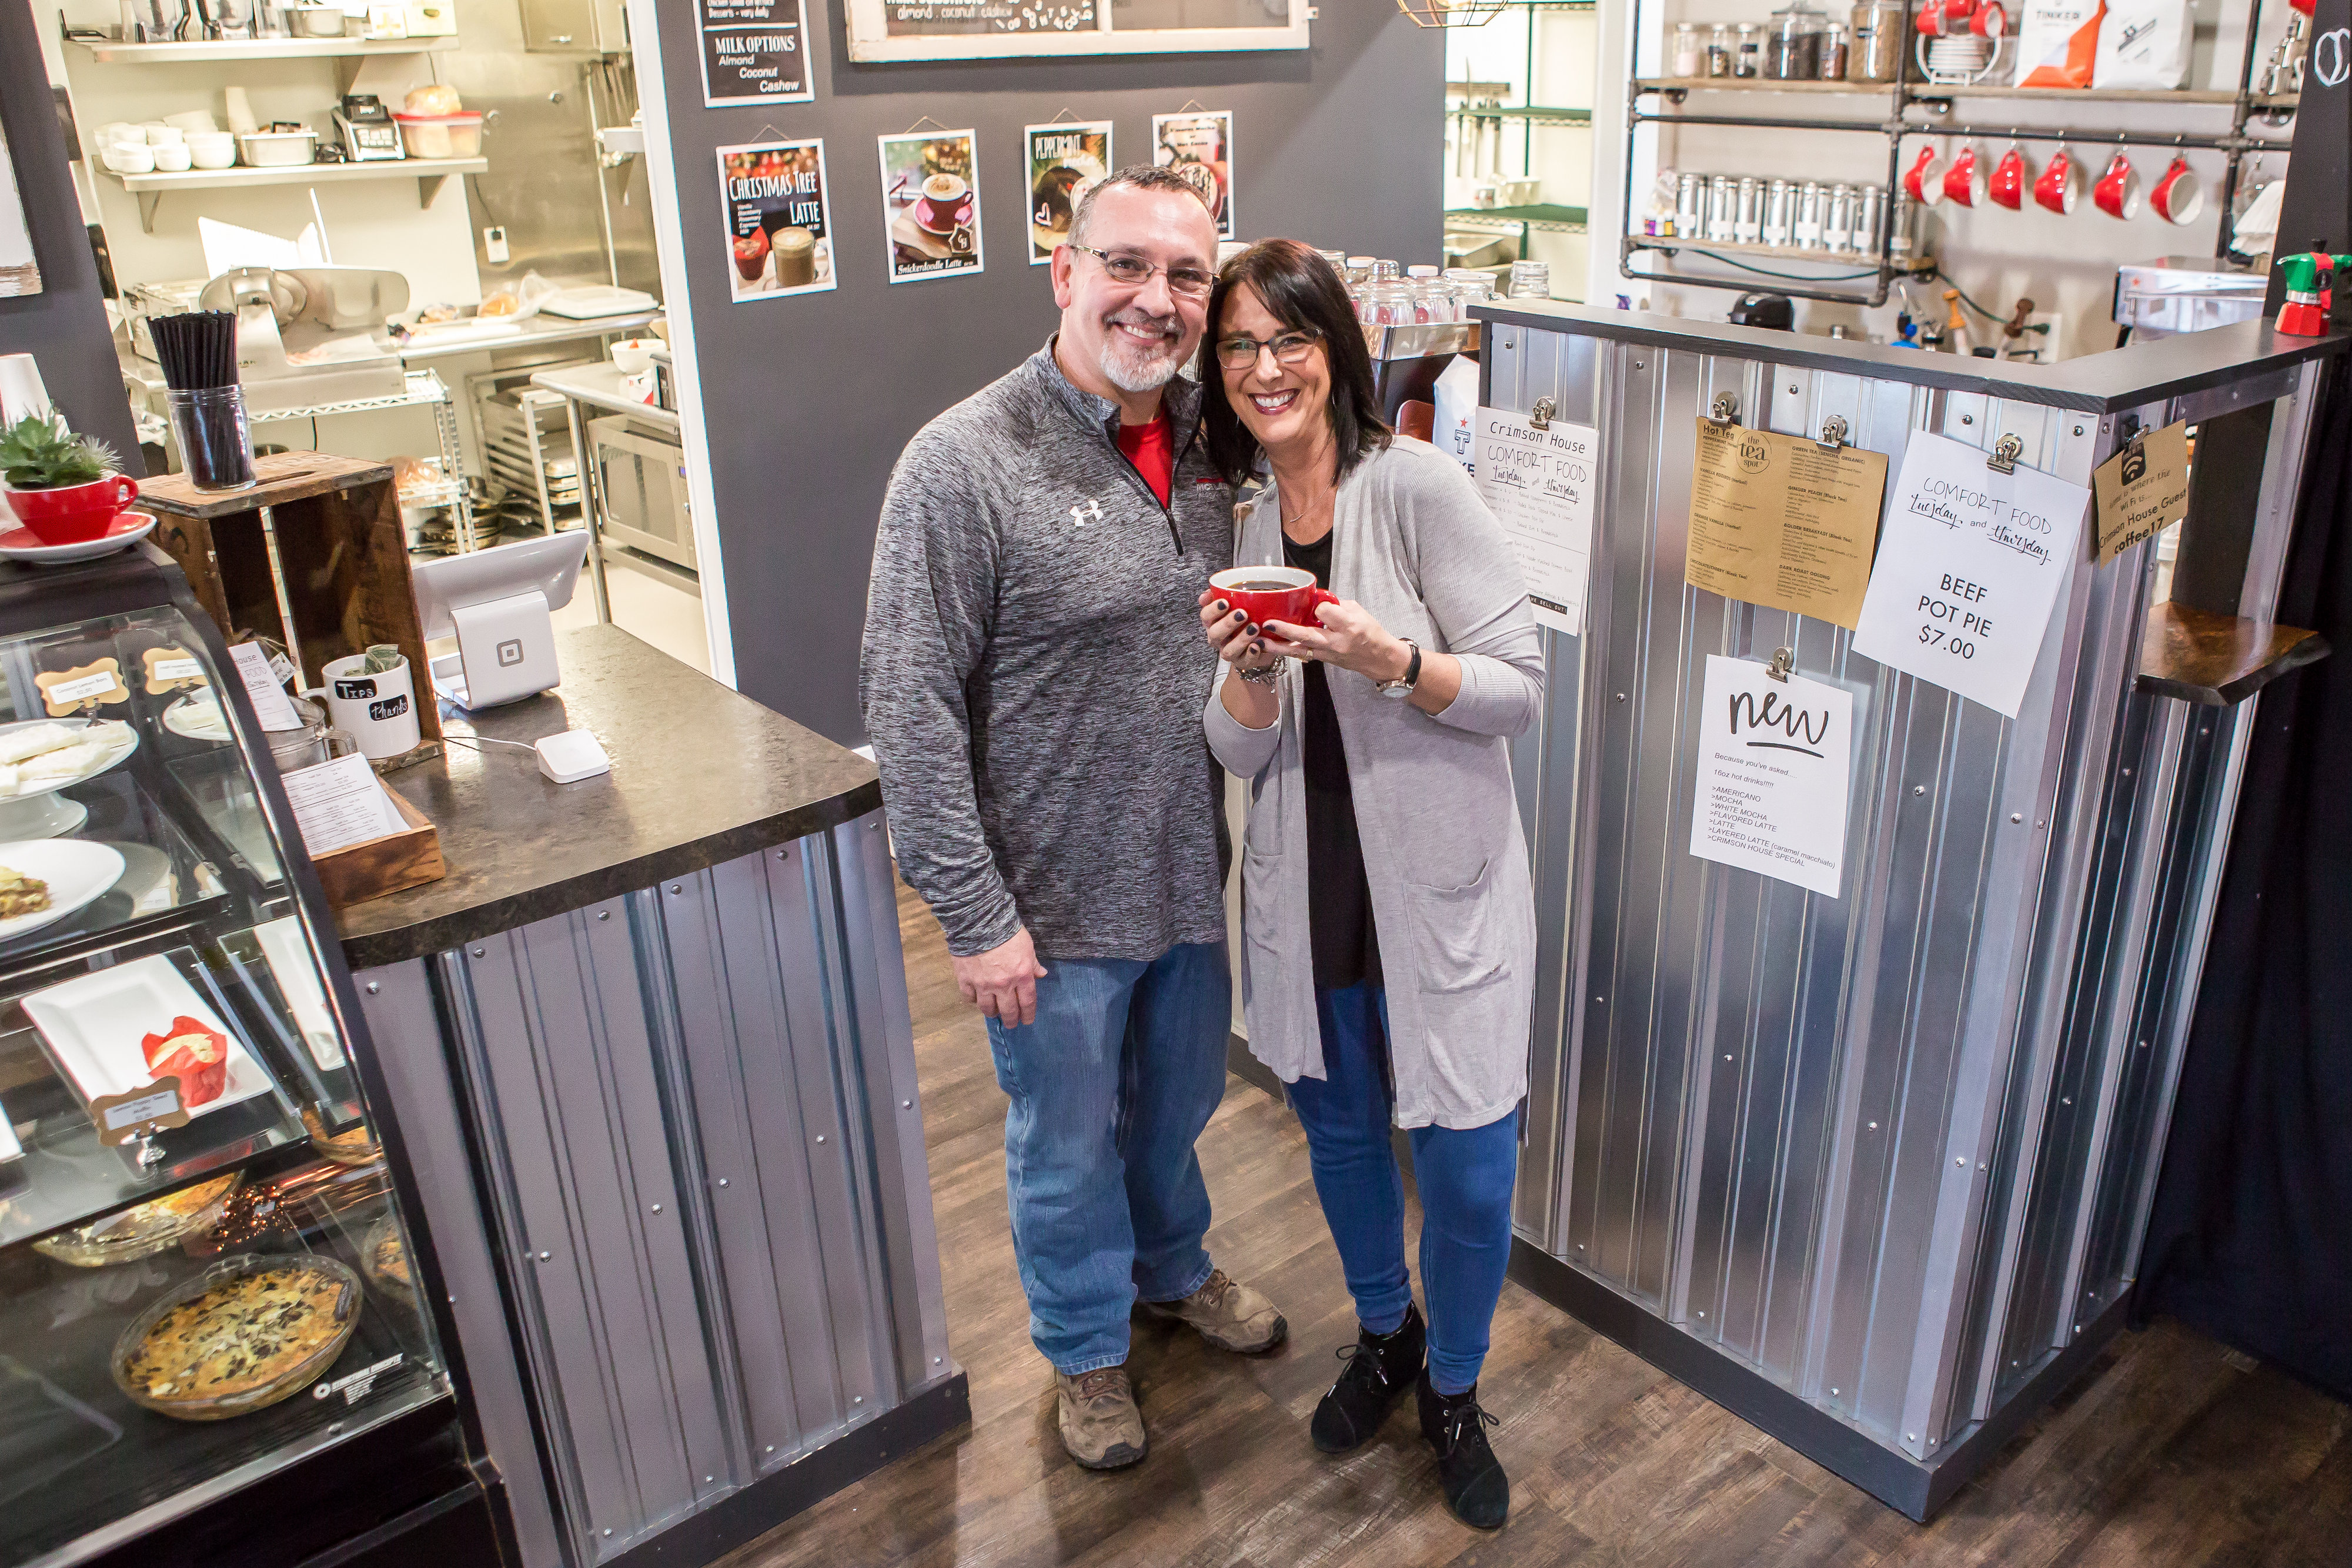 Crimson House Café's Jeff and Heidi Reed are missionaries-turned-business owners.